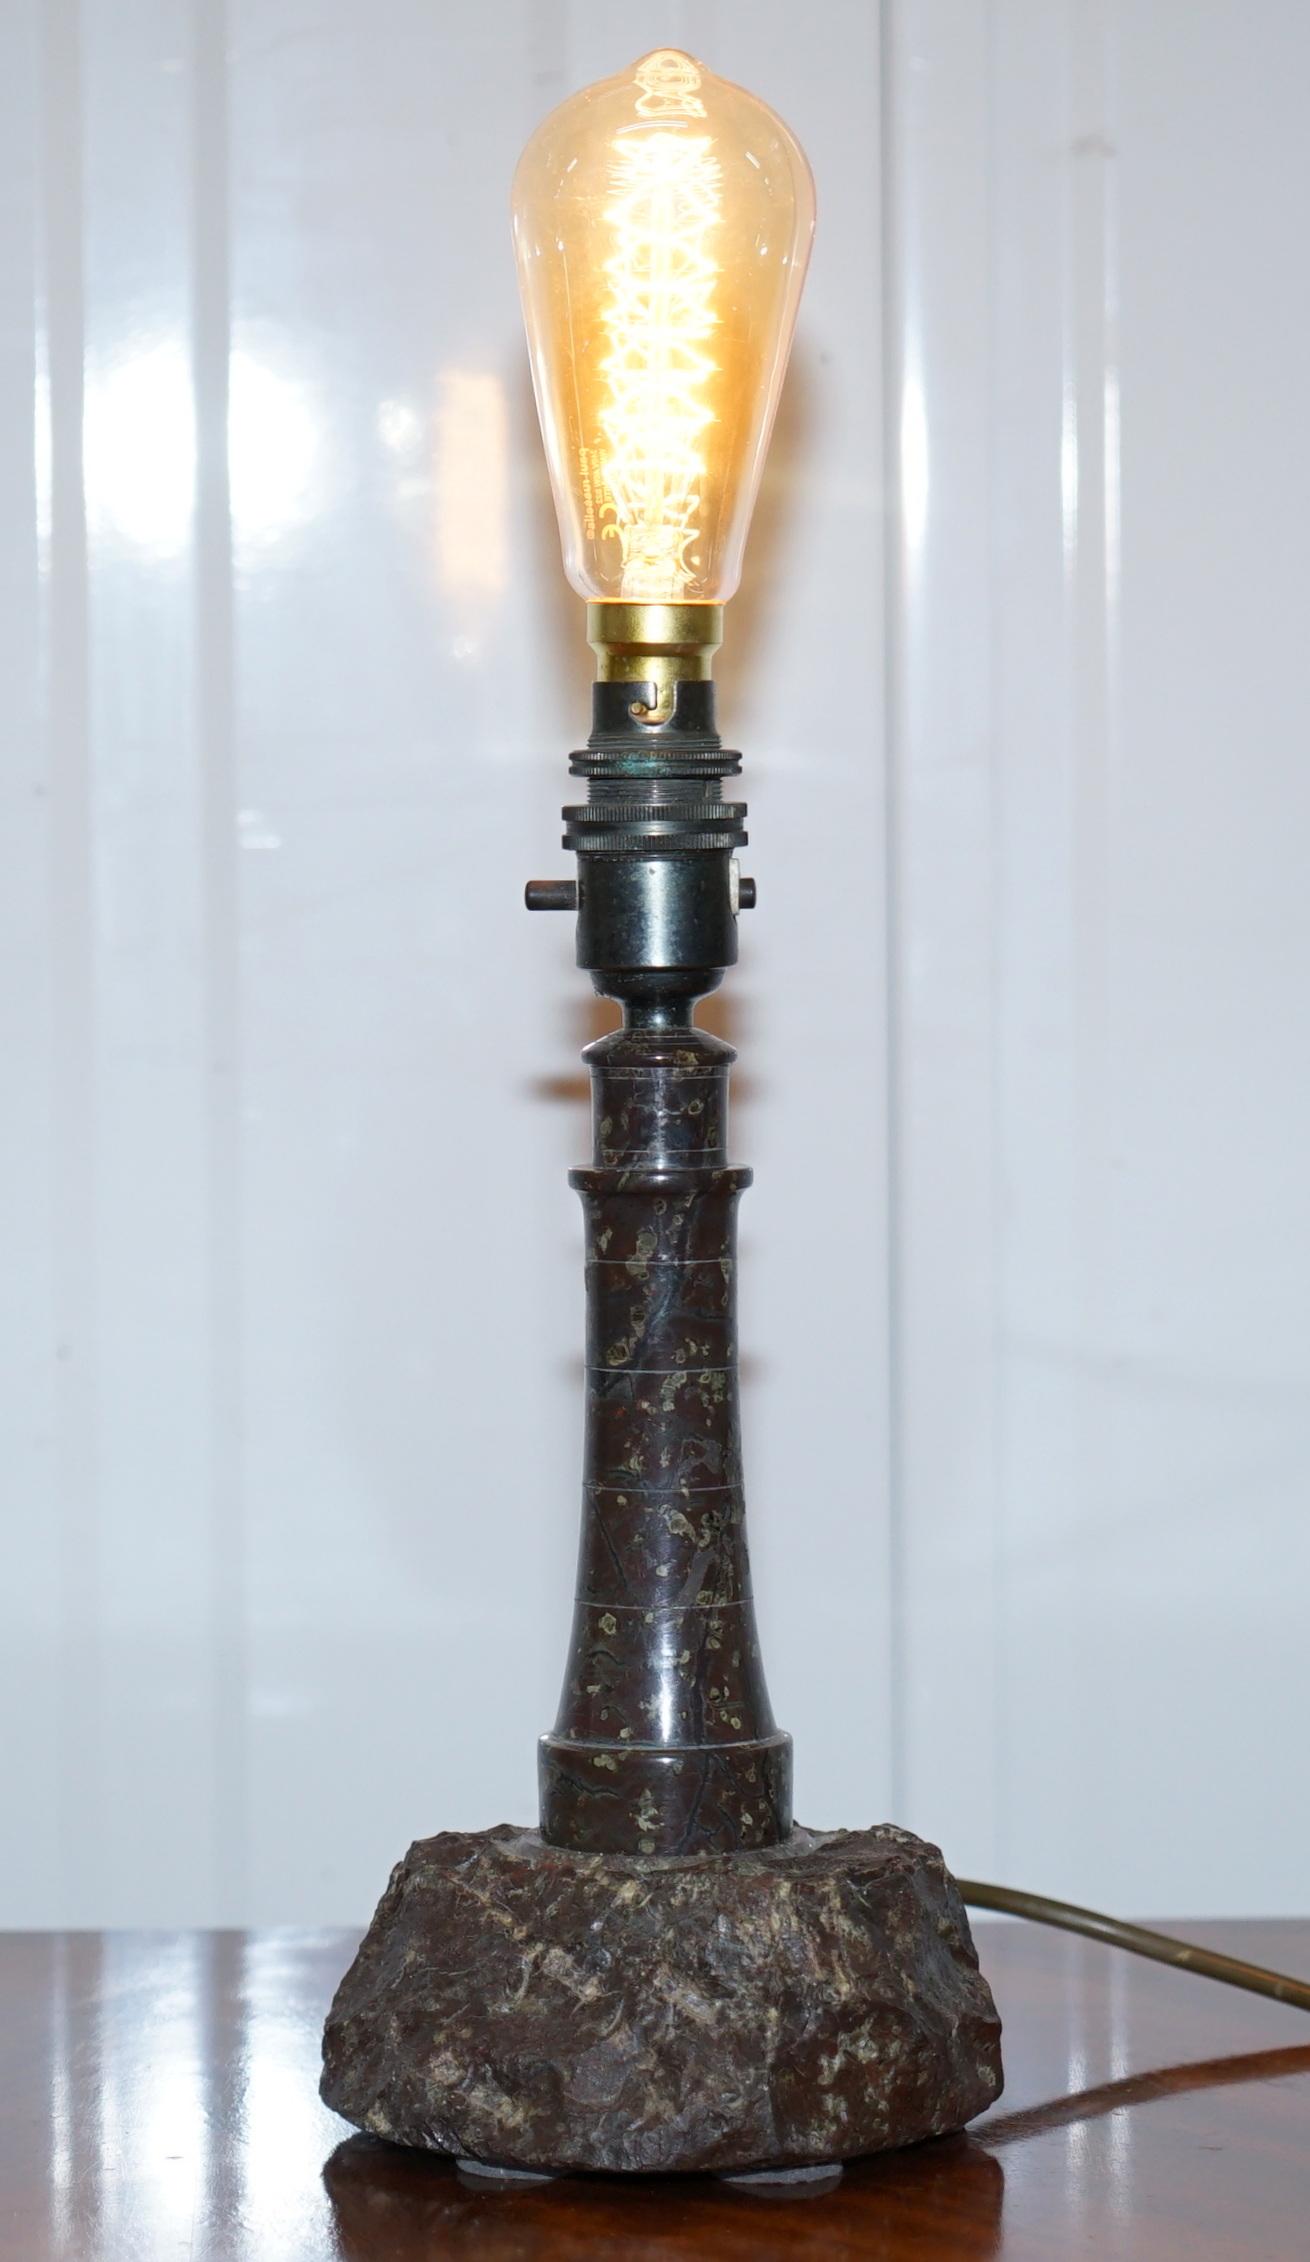 We are delighted to offer for sale this lovely vintage Cornish Serpentine marble lighthouse table lamp with bakelite fitting

A very good looking decorative table lamp, its highly detailed and would look good in any setting